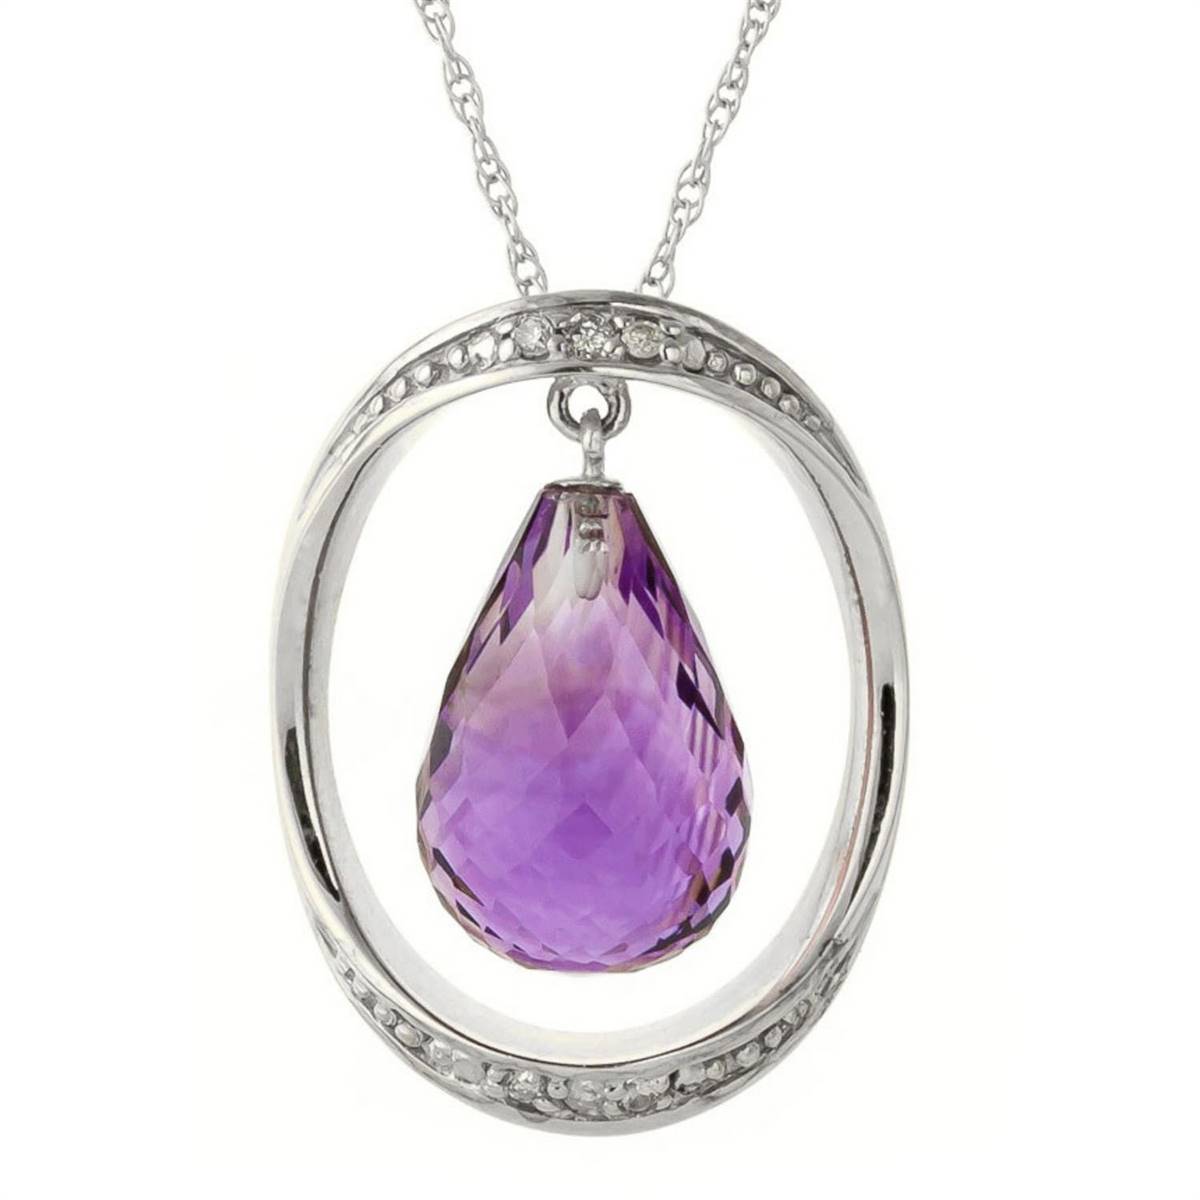 14K Solid White Gold Necklace w/ Natural Briolette Amethyst & Diamonds